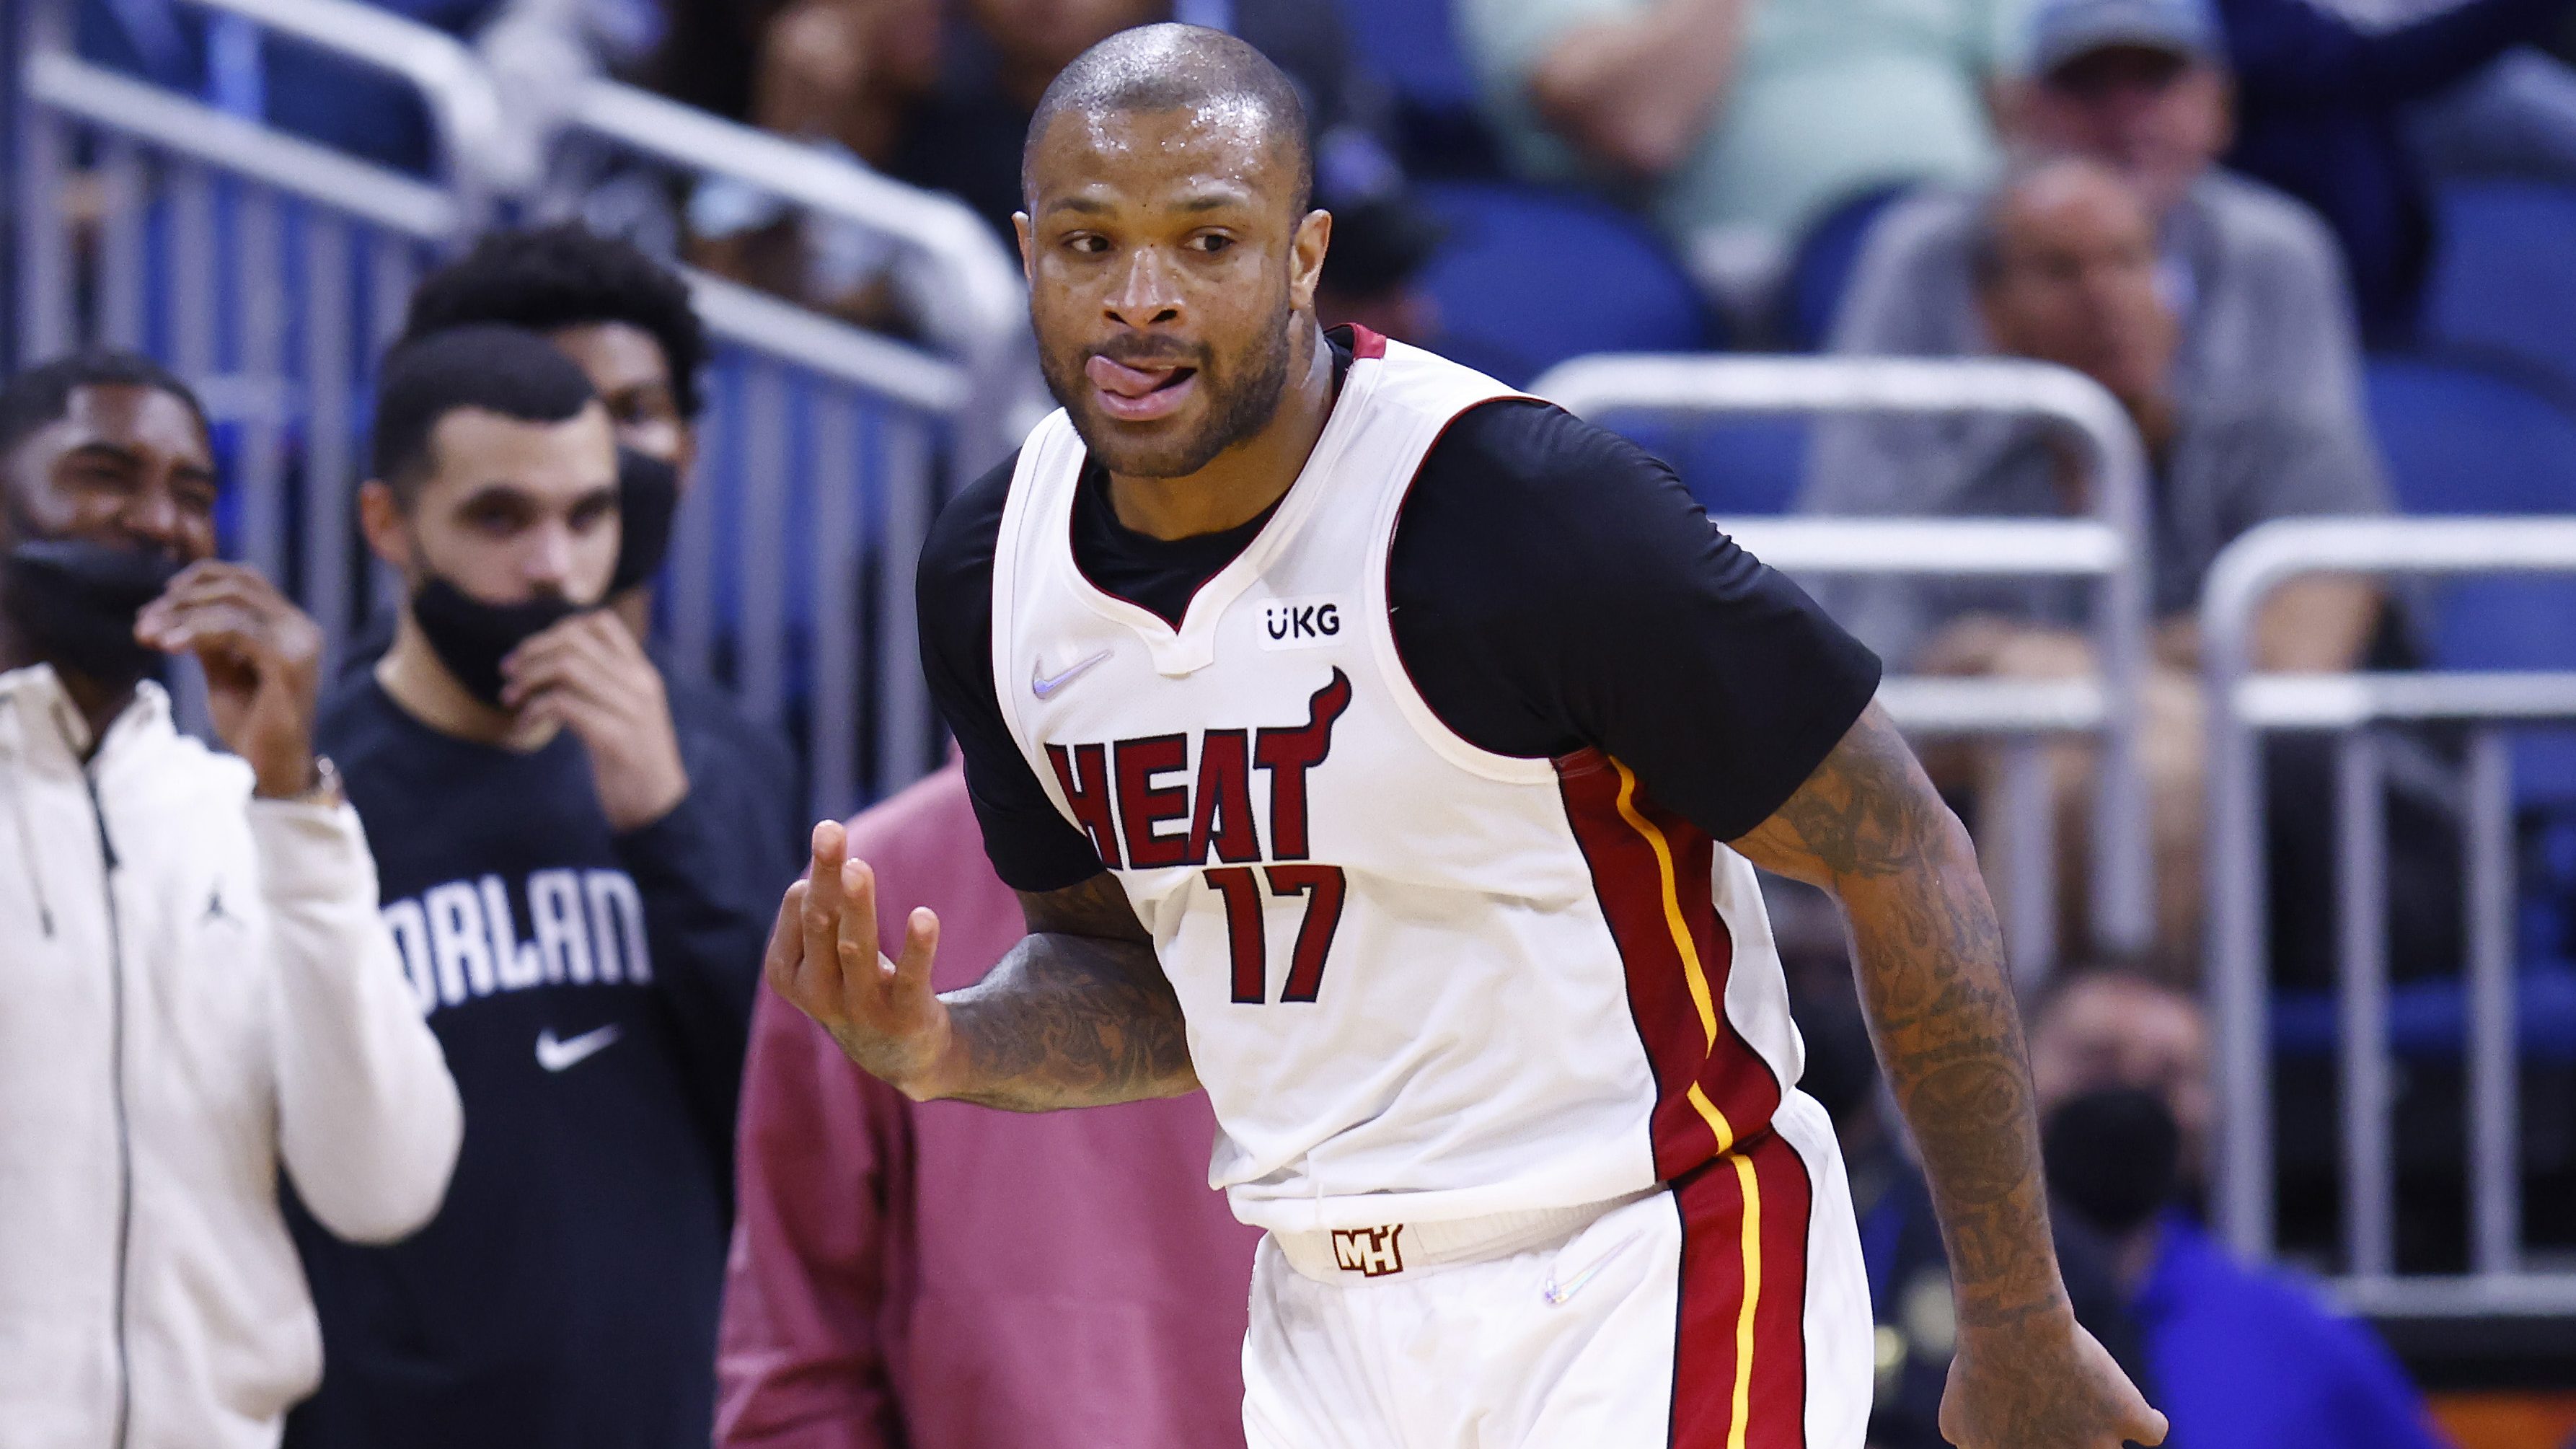 P.J. Tucker joins Sixers: Here's everything to know about him